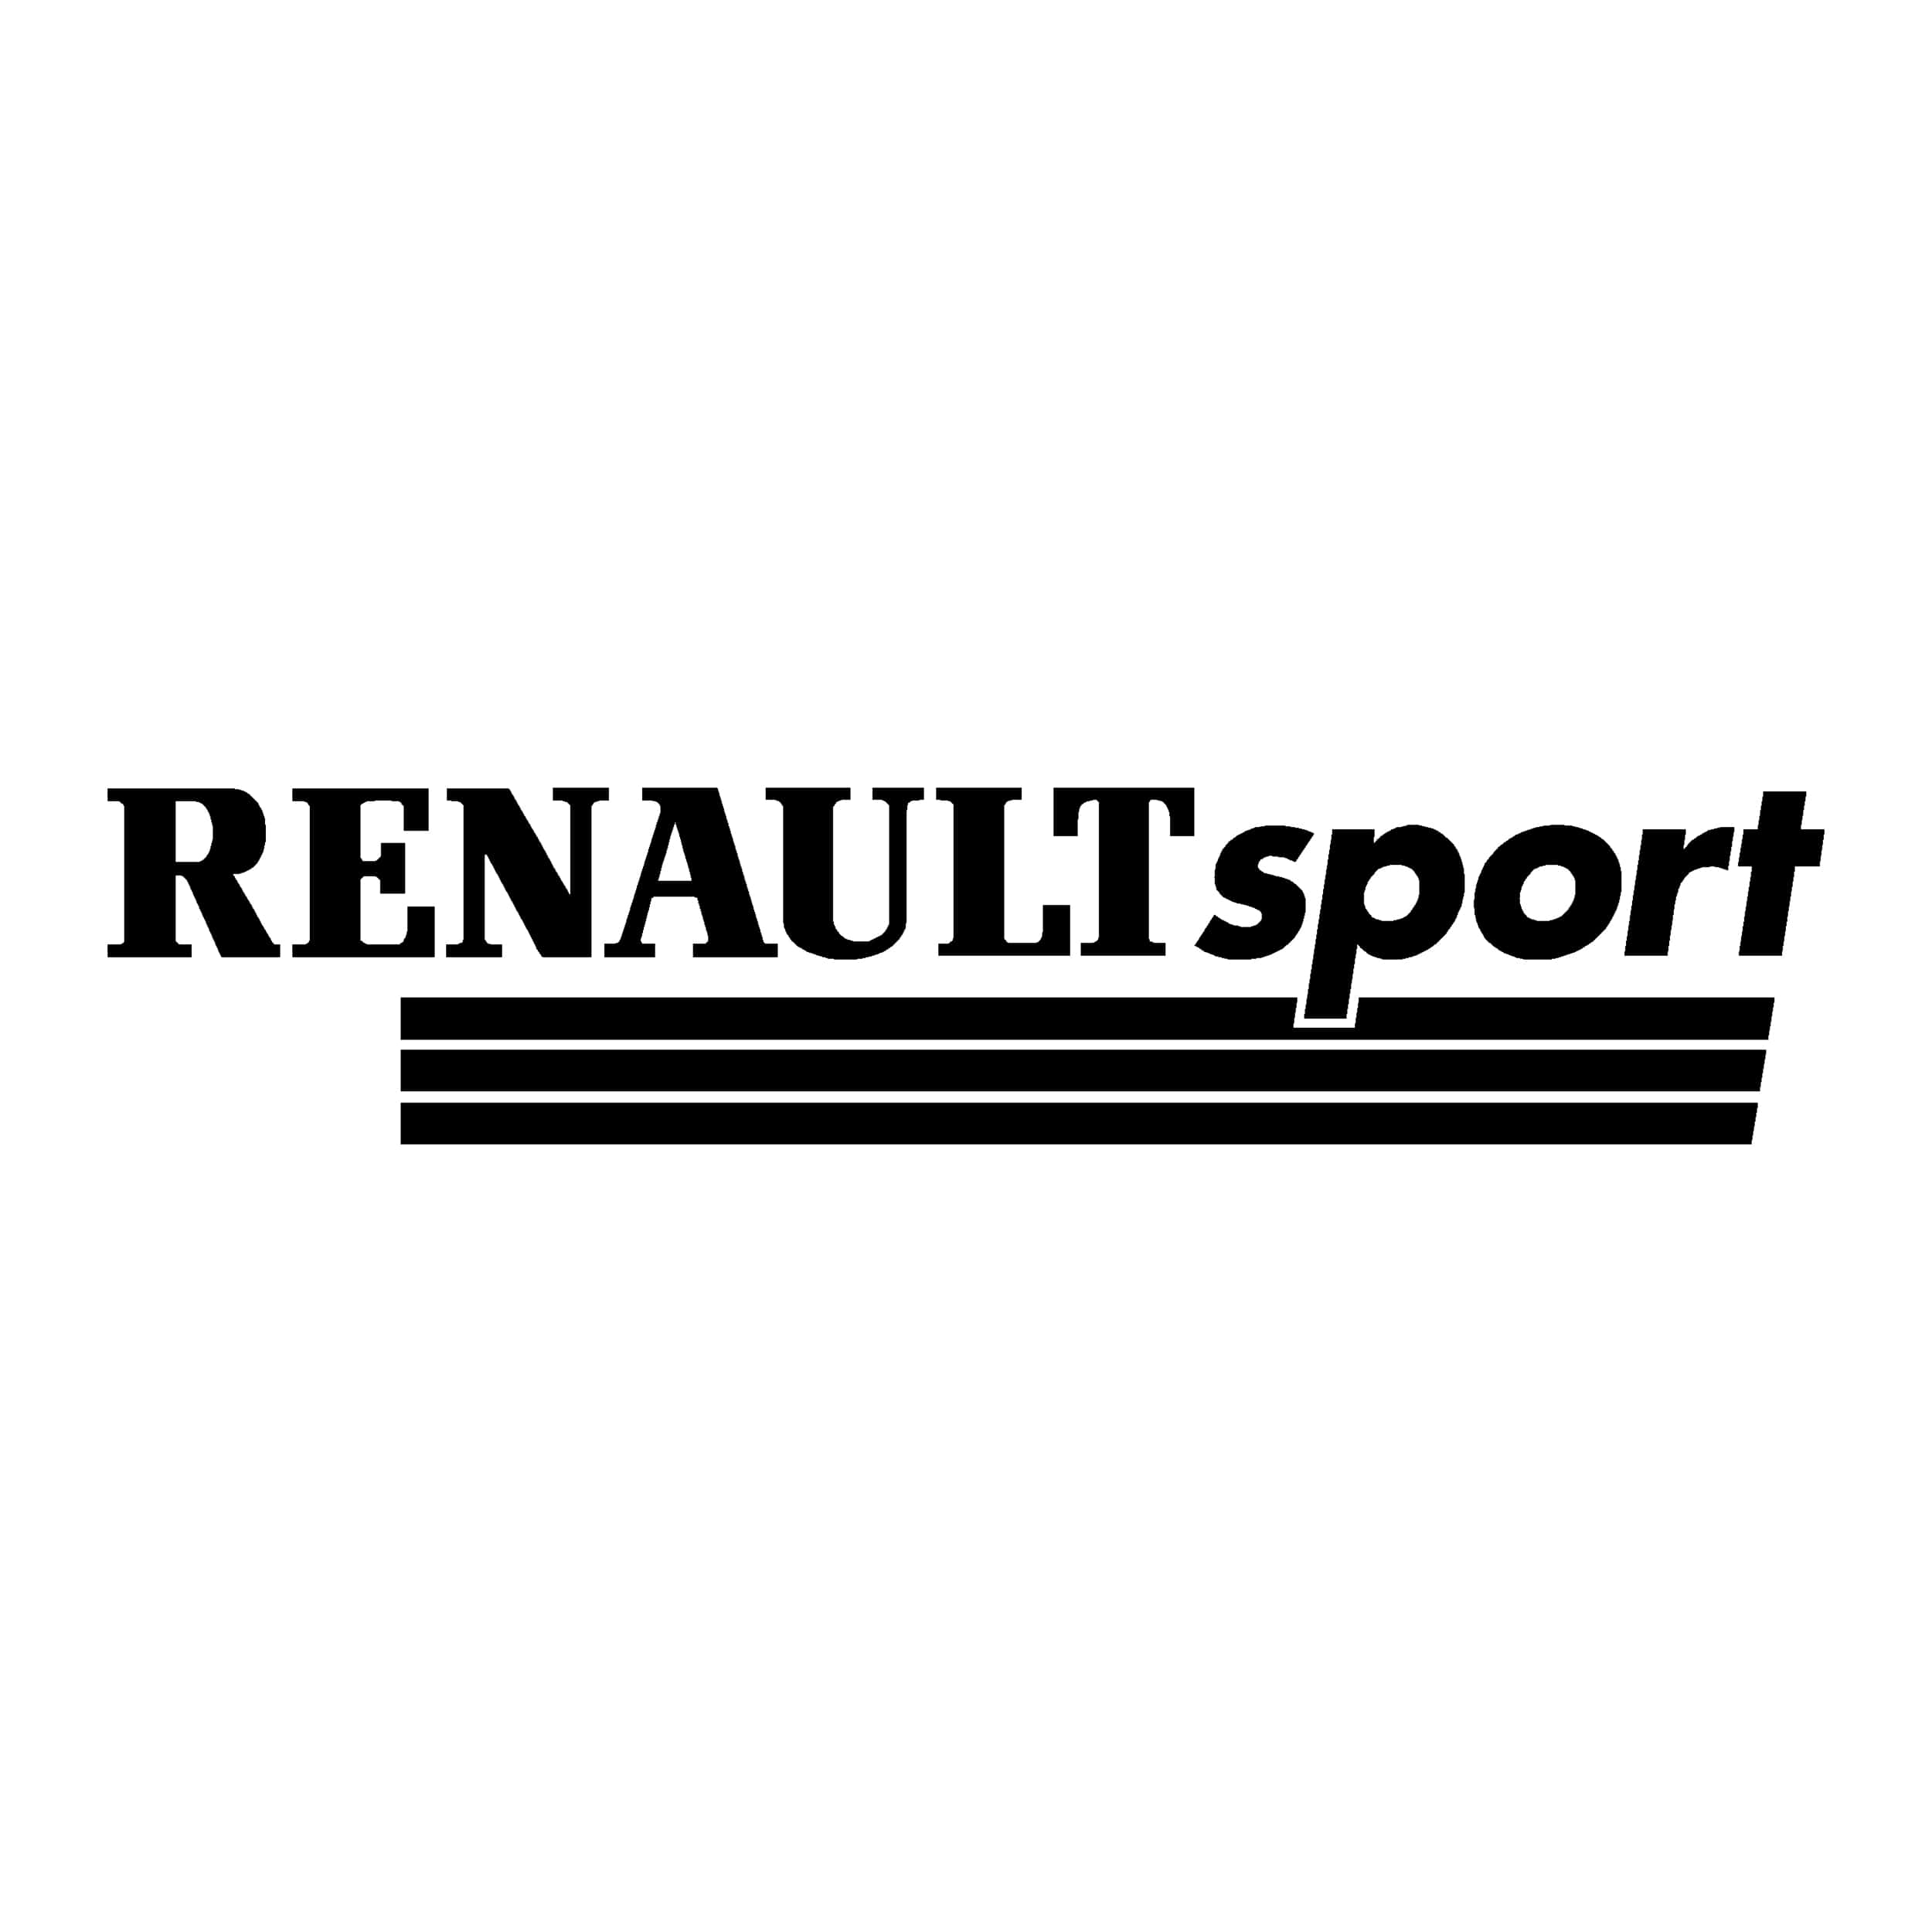 stickers-ref-62-renault-sport-logo-losange-1960-1972-voiture-tuning-competition-deco-adhesive-auto-racing-rallye-min